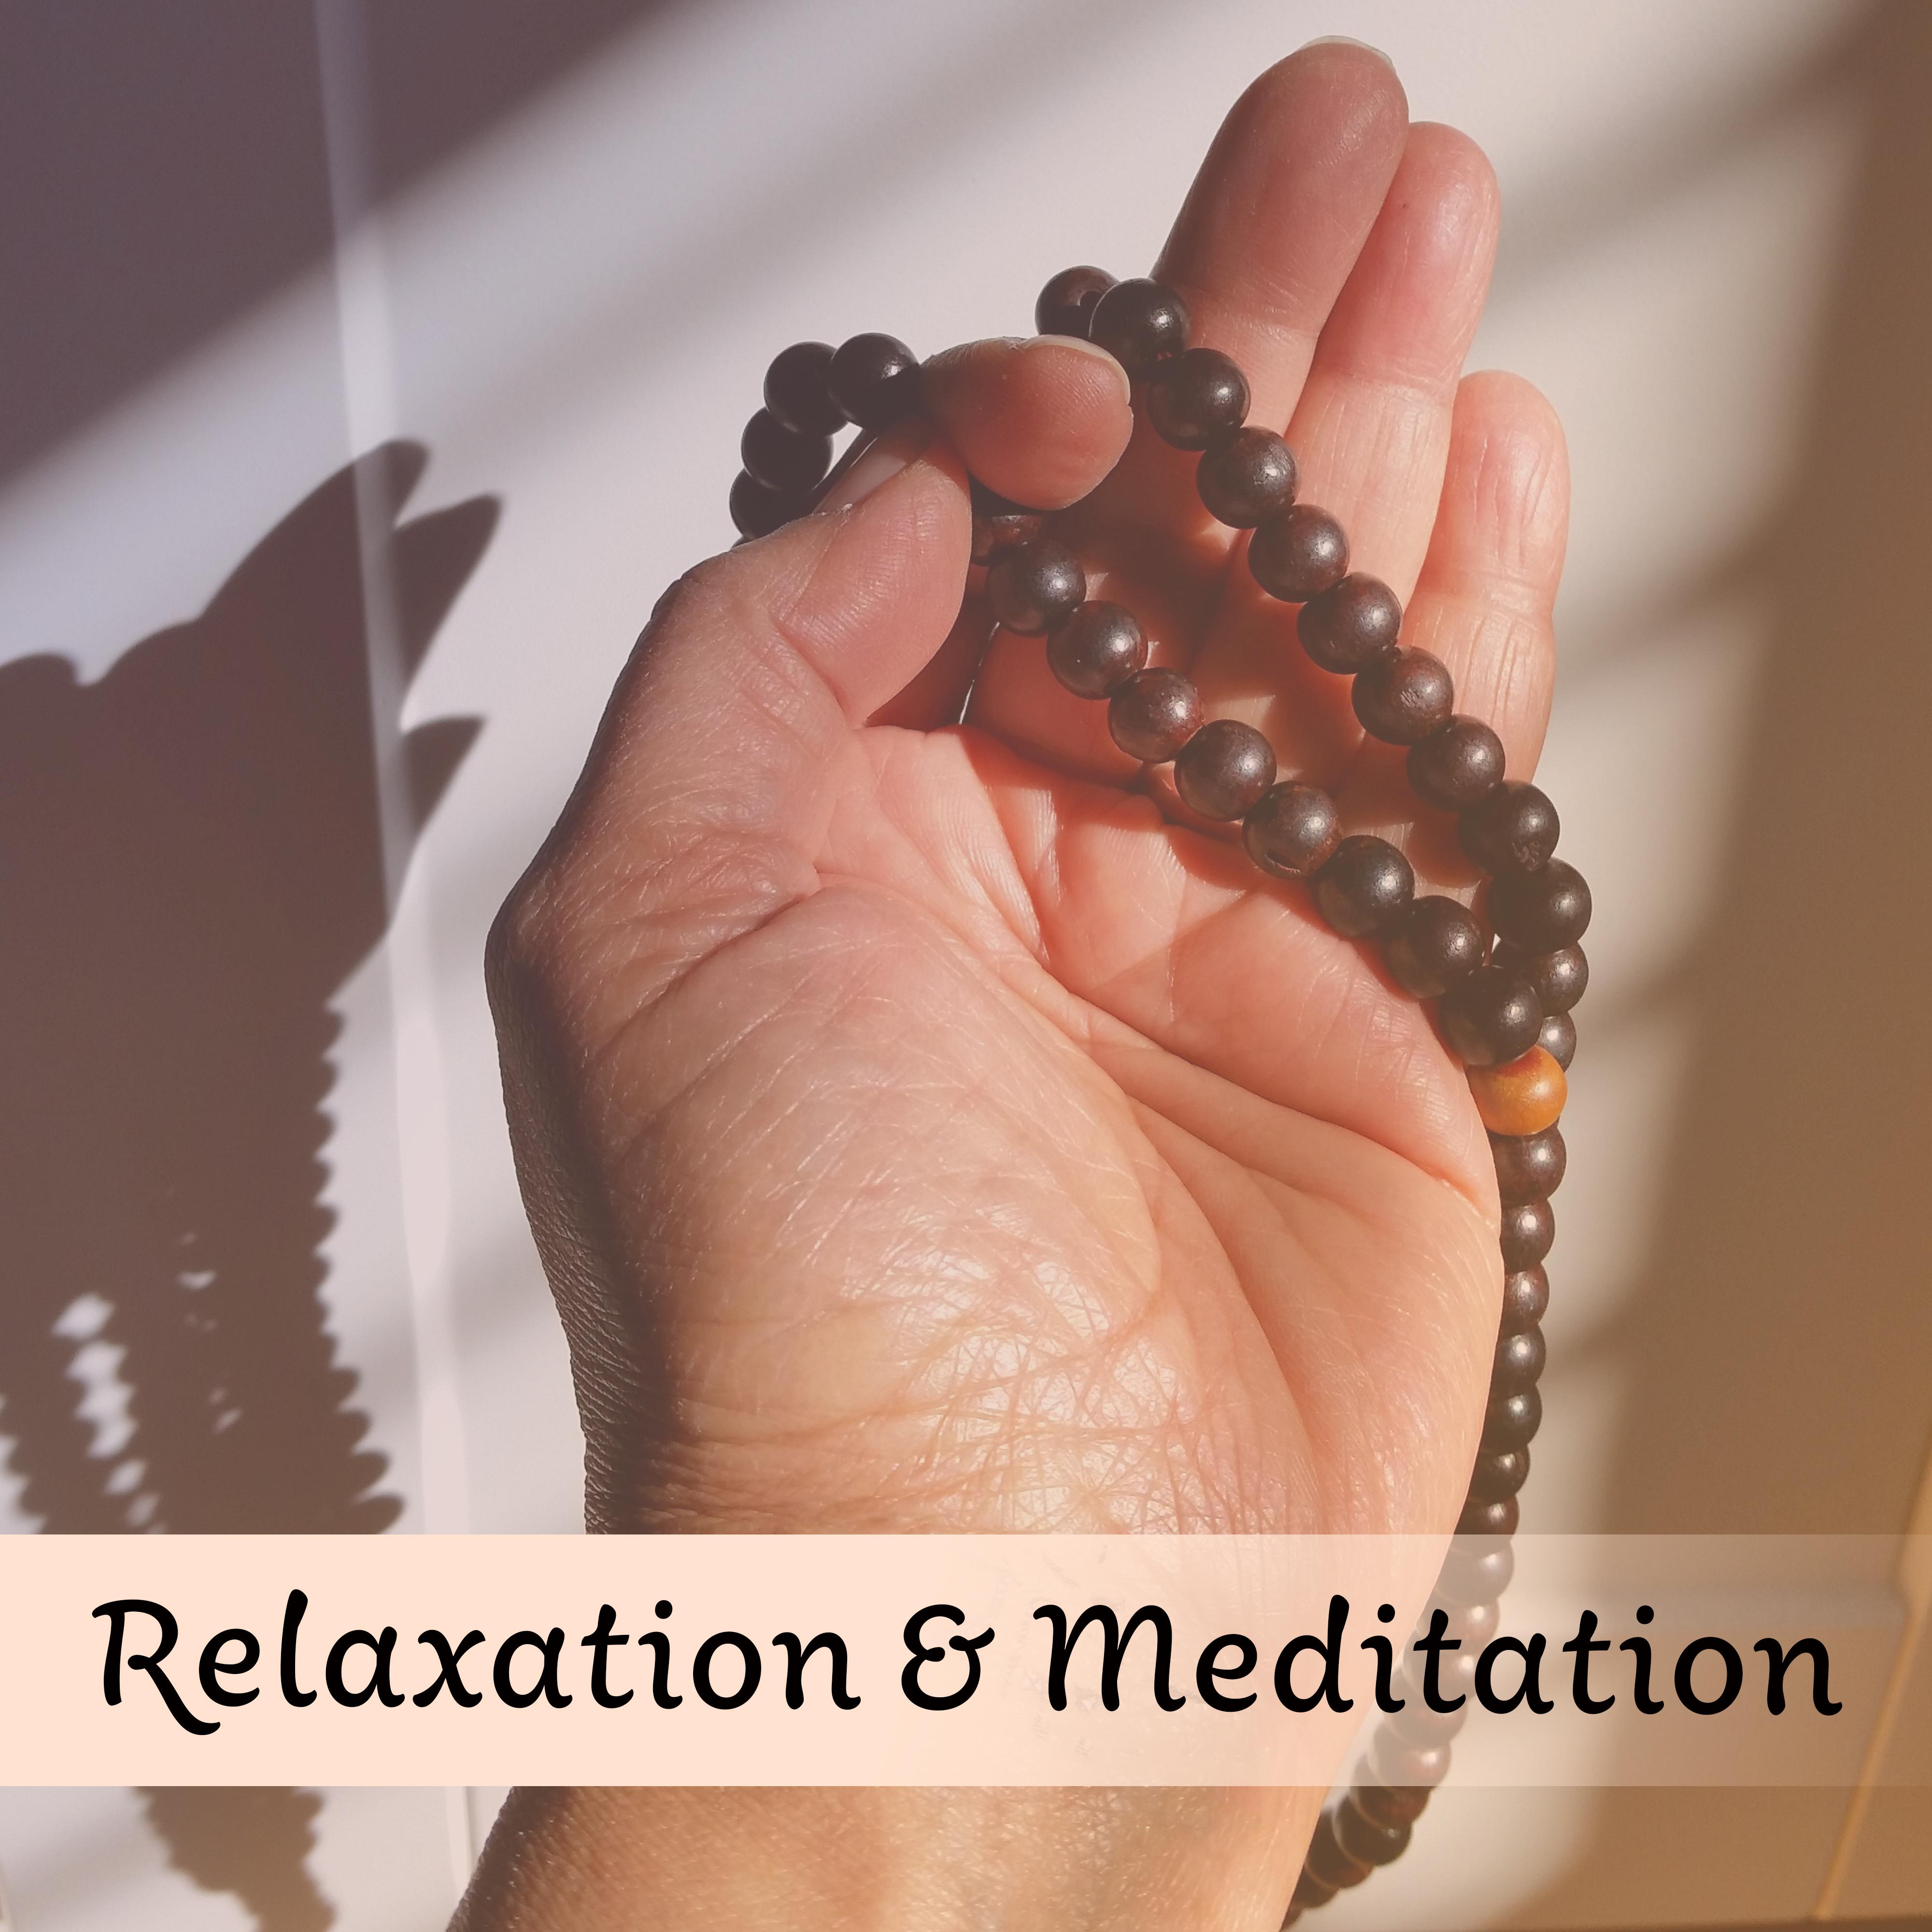 Relaxation & Meditation – New Age, Sounds of Nature, Relaxing Music, Yoga, Rest, Manage Stress